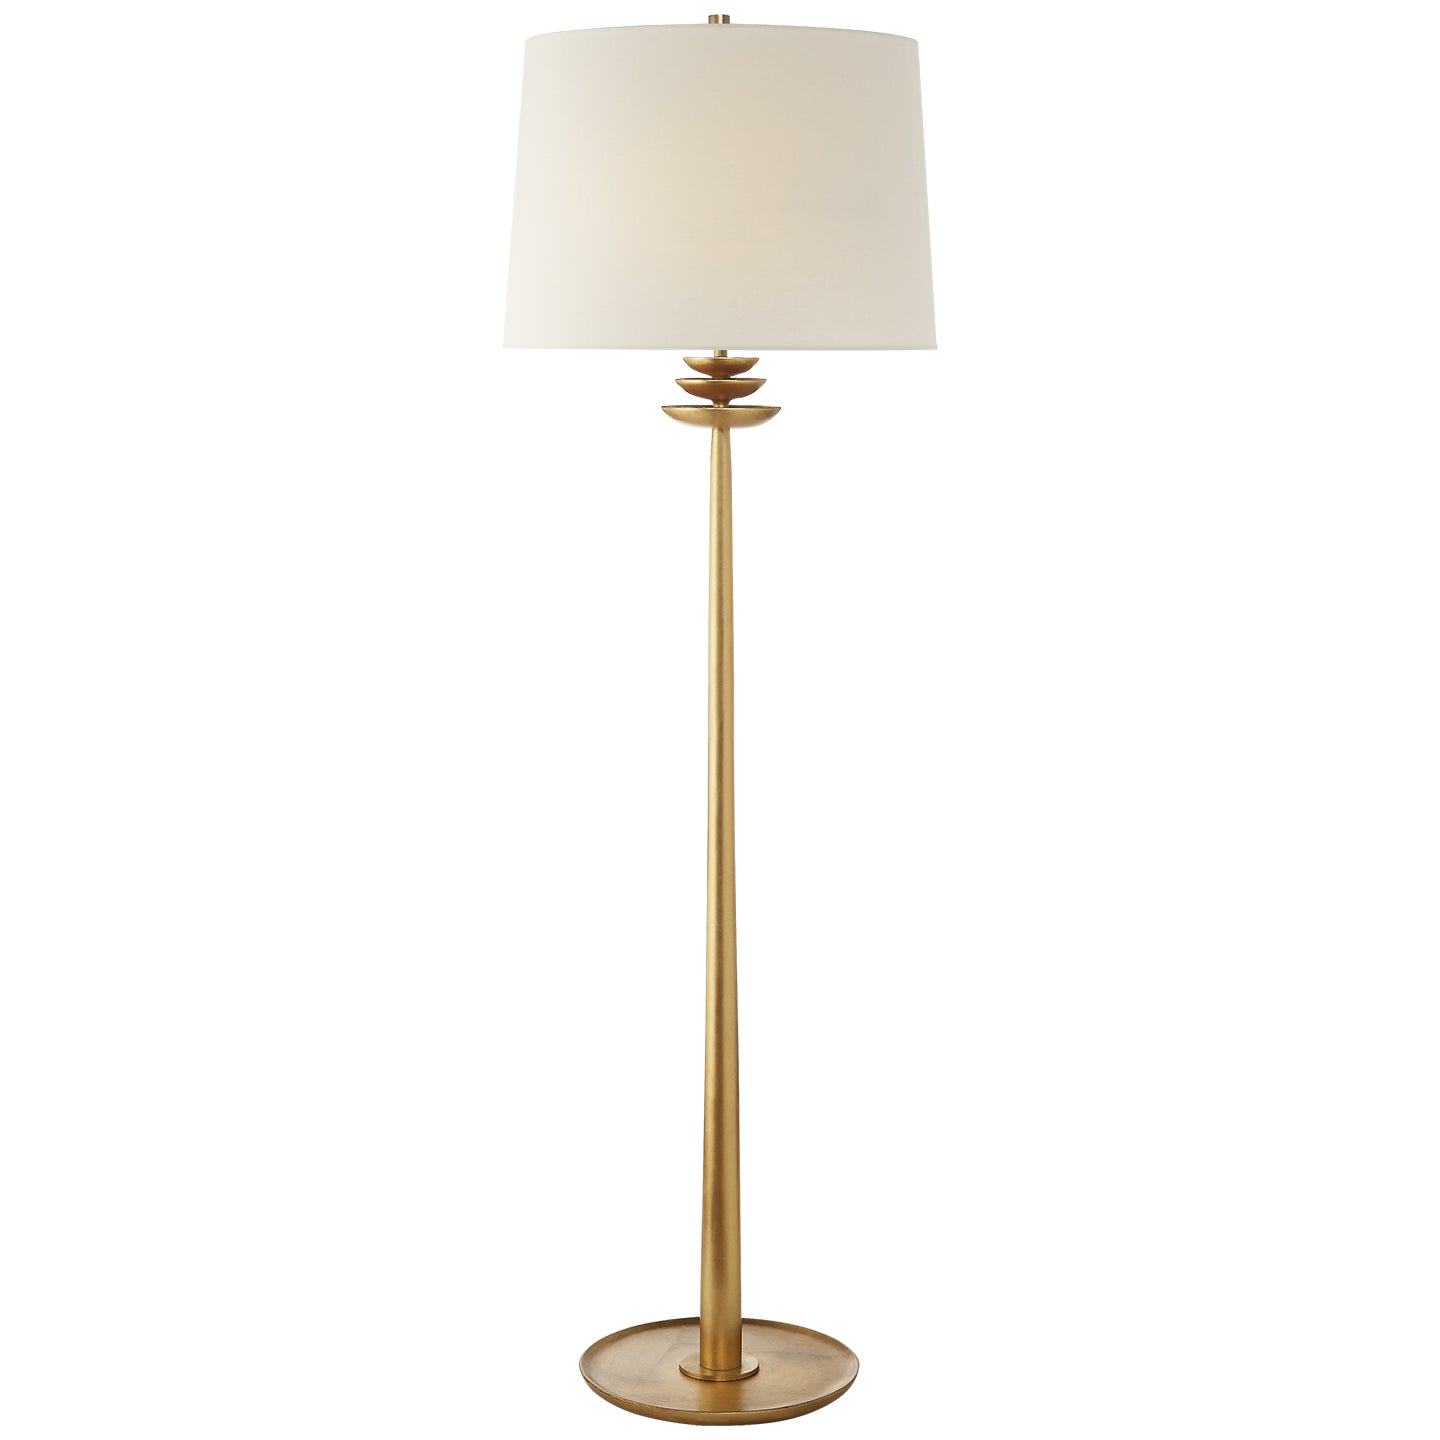 Load image into Gallery viewer, Visual Comfort Signature - ARN 1301G-L - Two Light Floor Lamp - Beaumont - Gild
